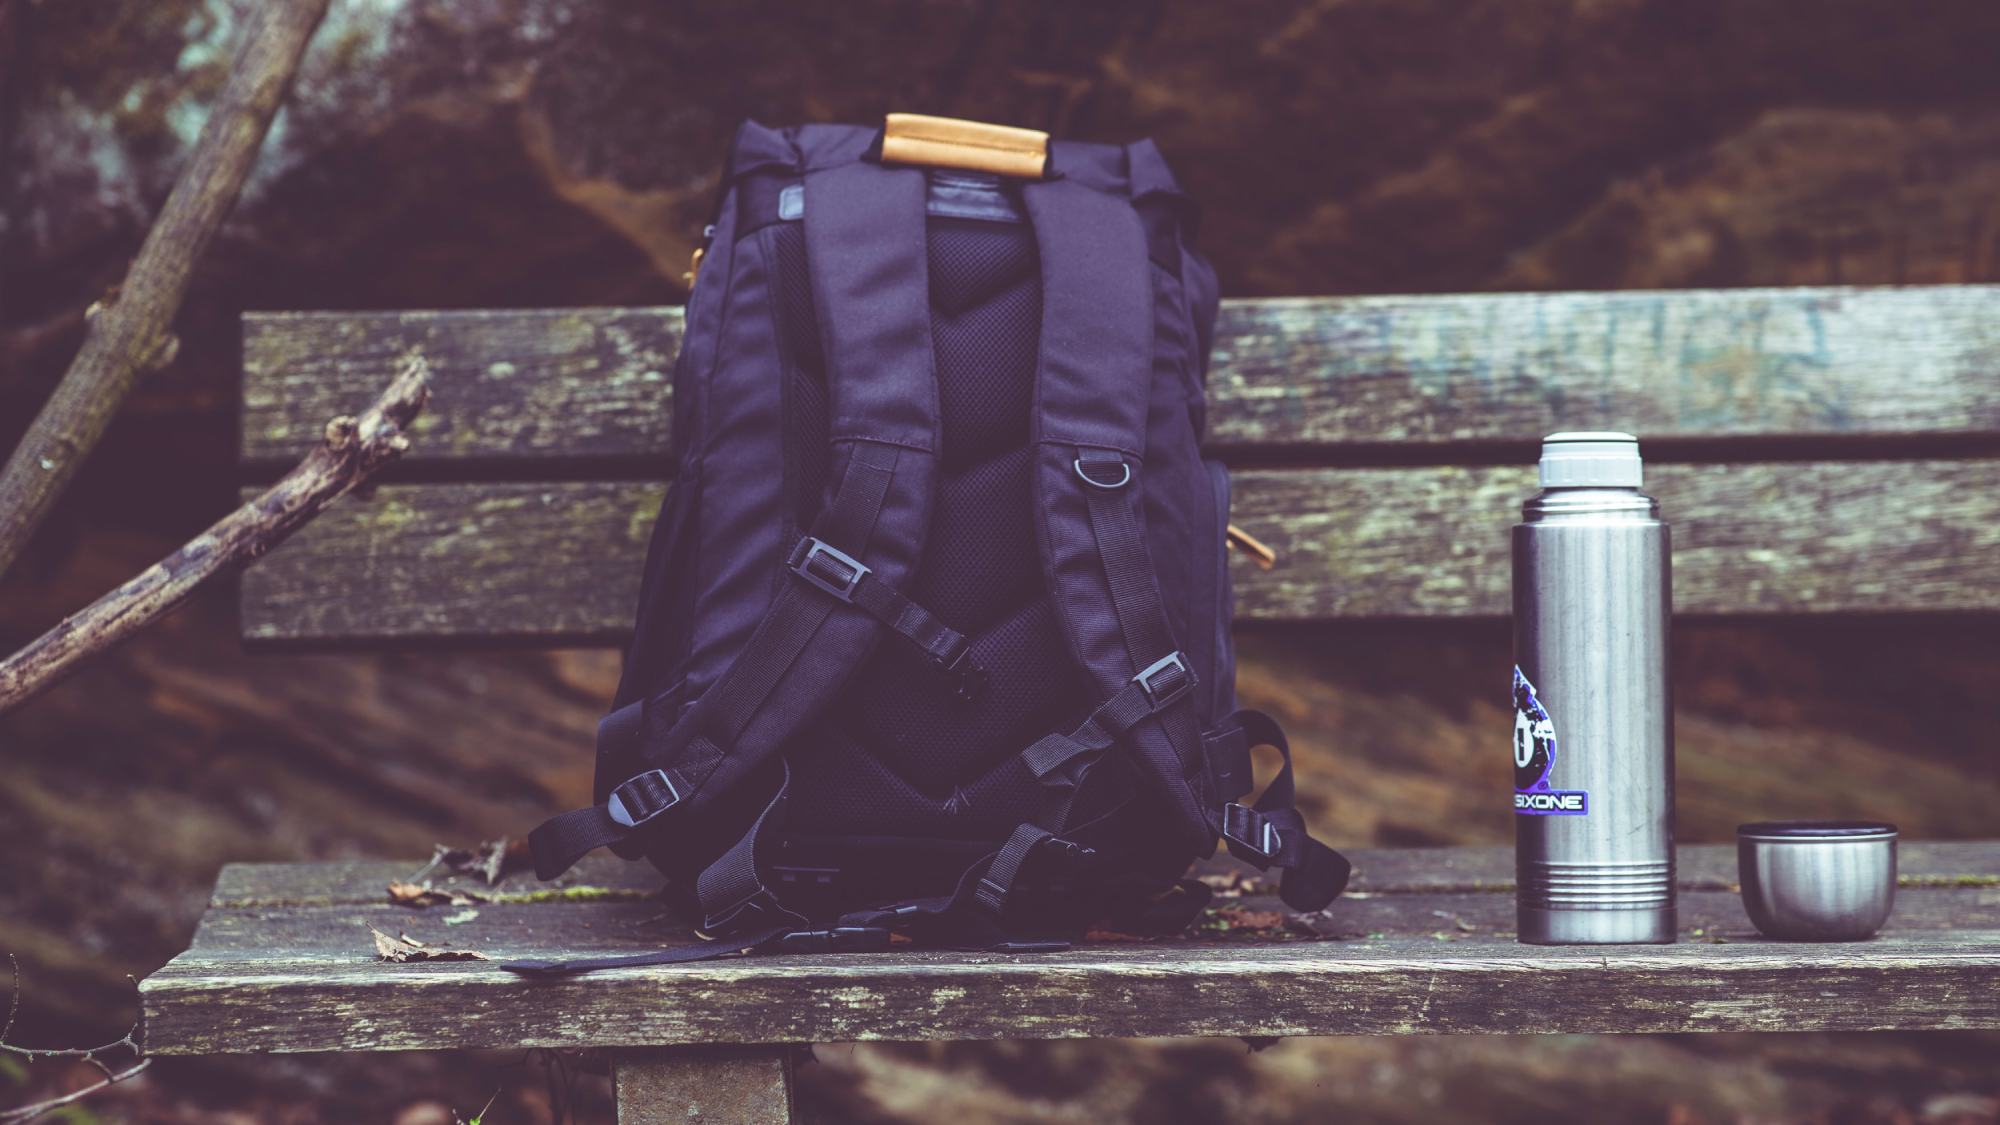 A black backpack on a weathered wooden bench in the forest, with a silver metal water bottle next to it.